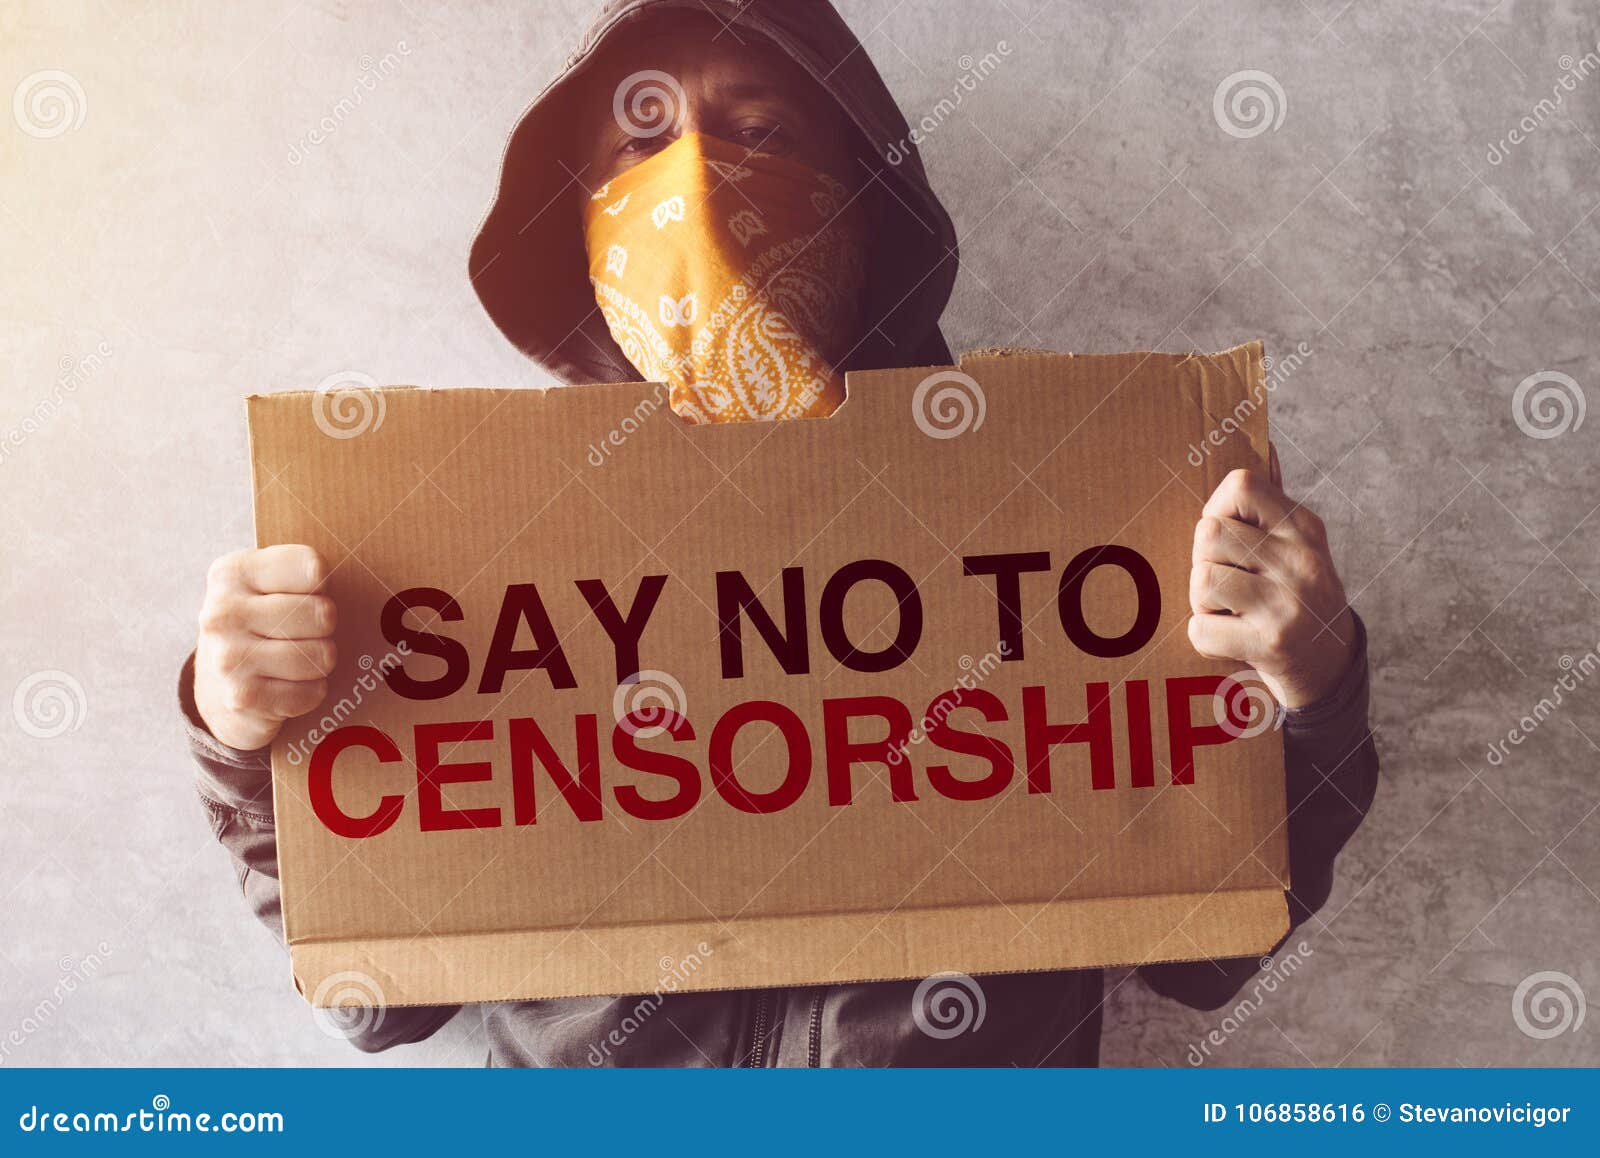 activist holding say no to censorship protest sign